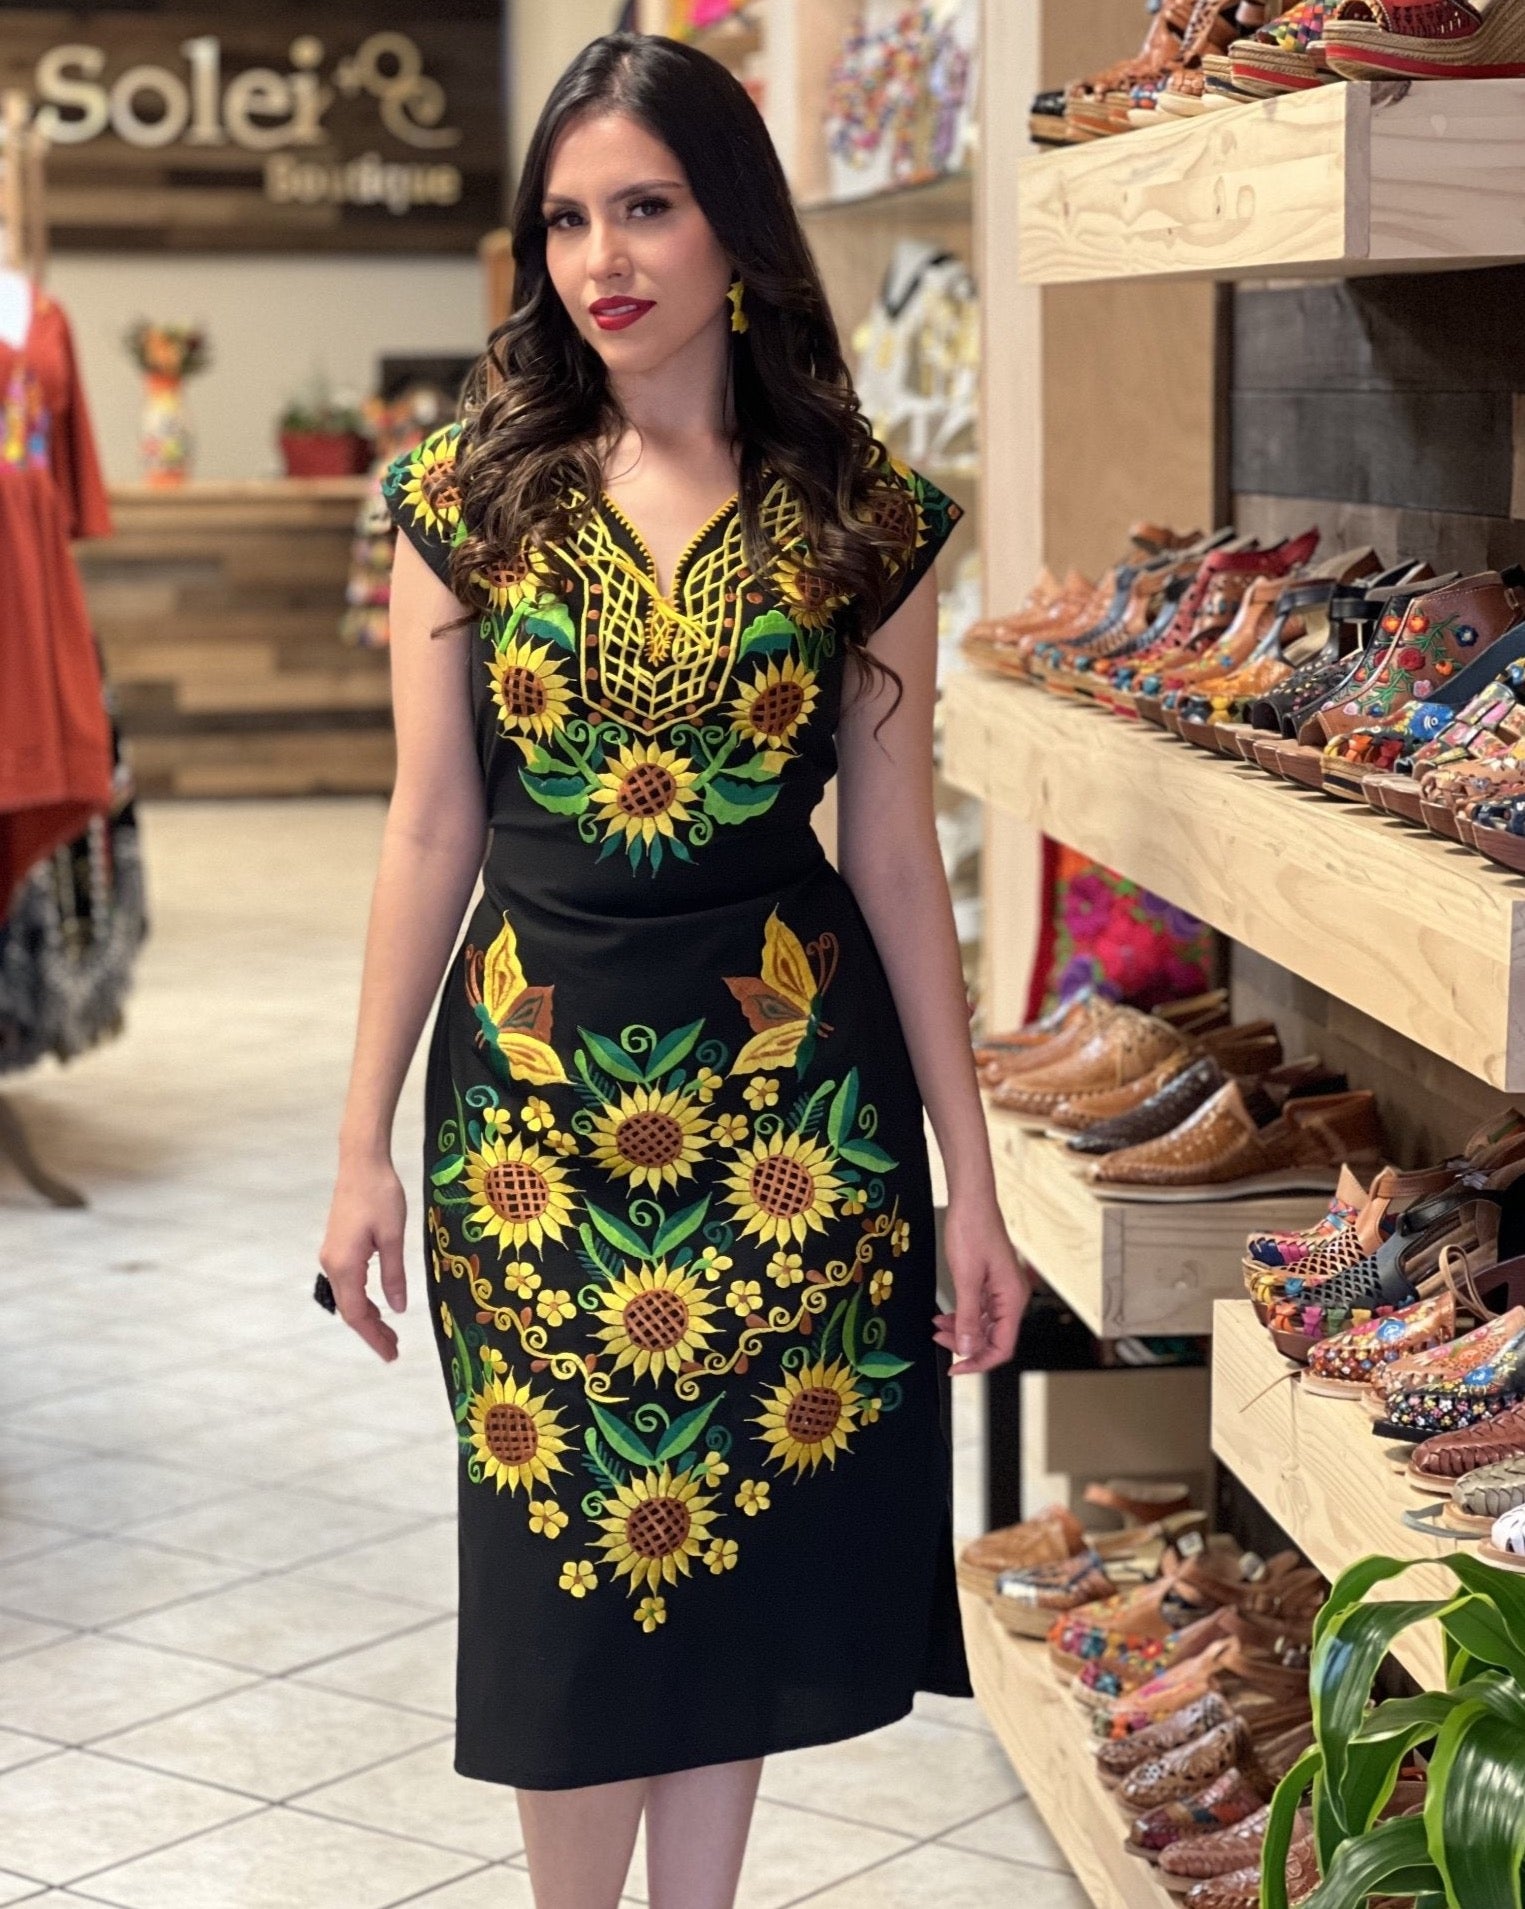 Mexican Sunflower Embroidered Dress. Long Kimono Sunflower Dress. - Solei Store